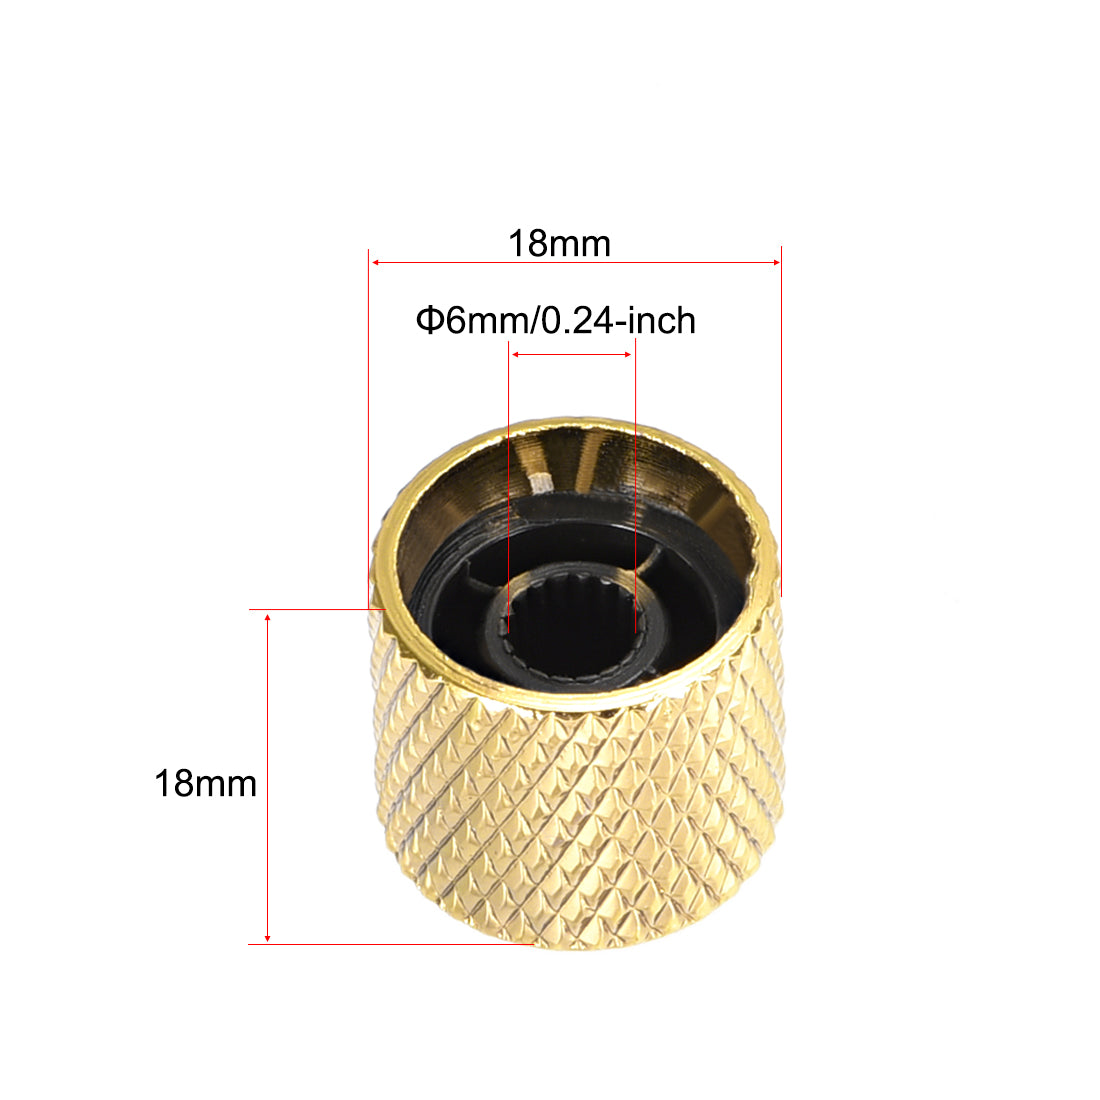 uxcell Uxcell 6mm Metal Potentiometer Control Knobs for Electric Guitar Bass Volume Tone Knobs Gold Tone 2pcs